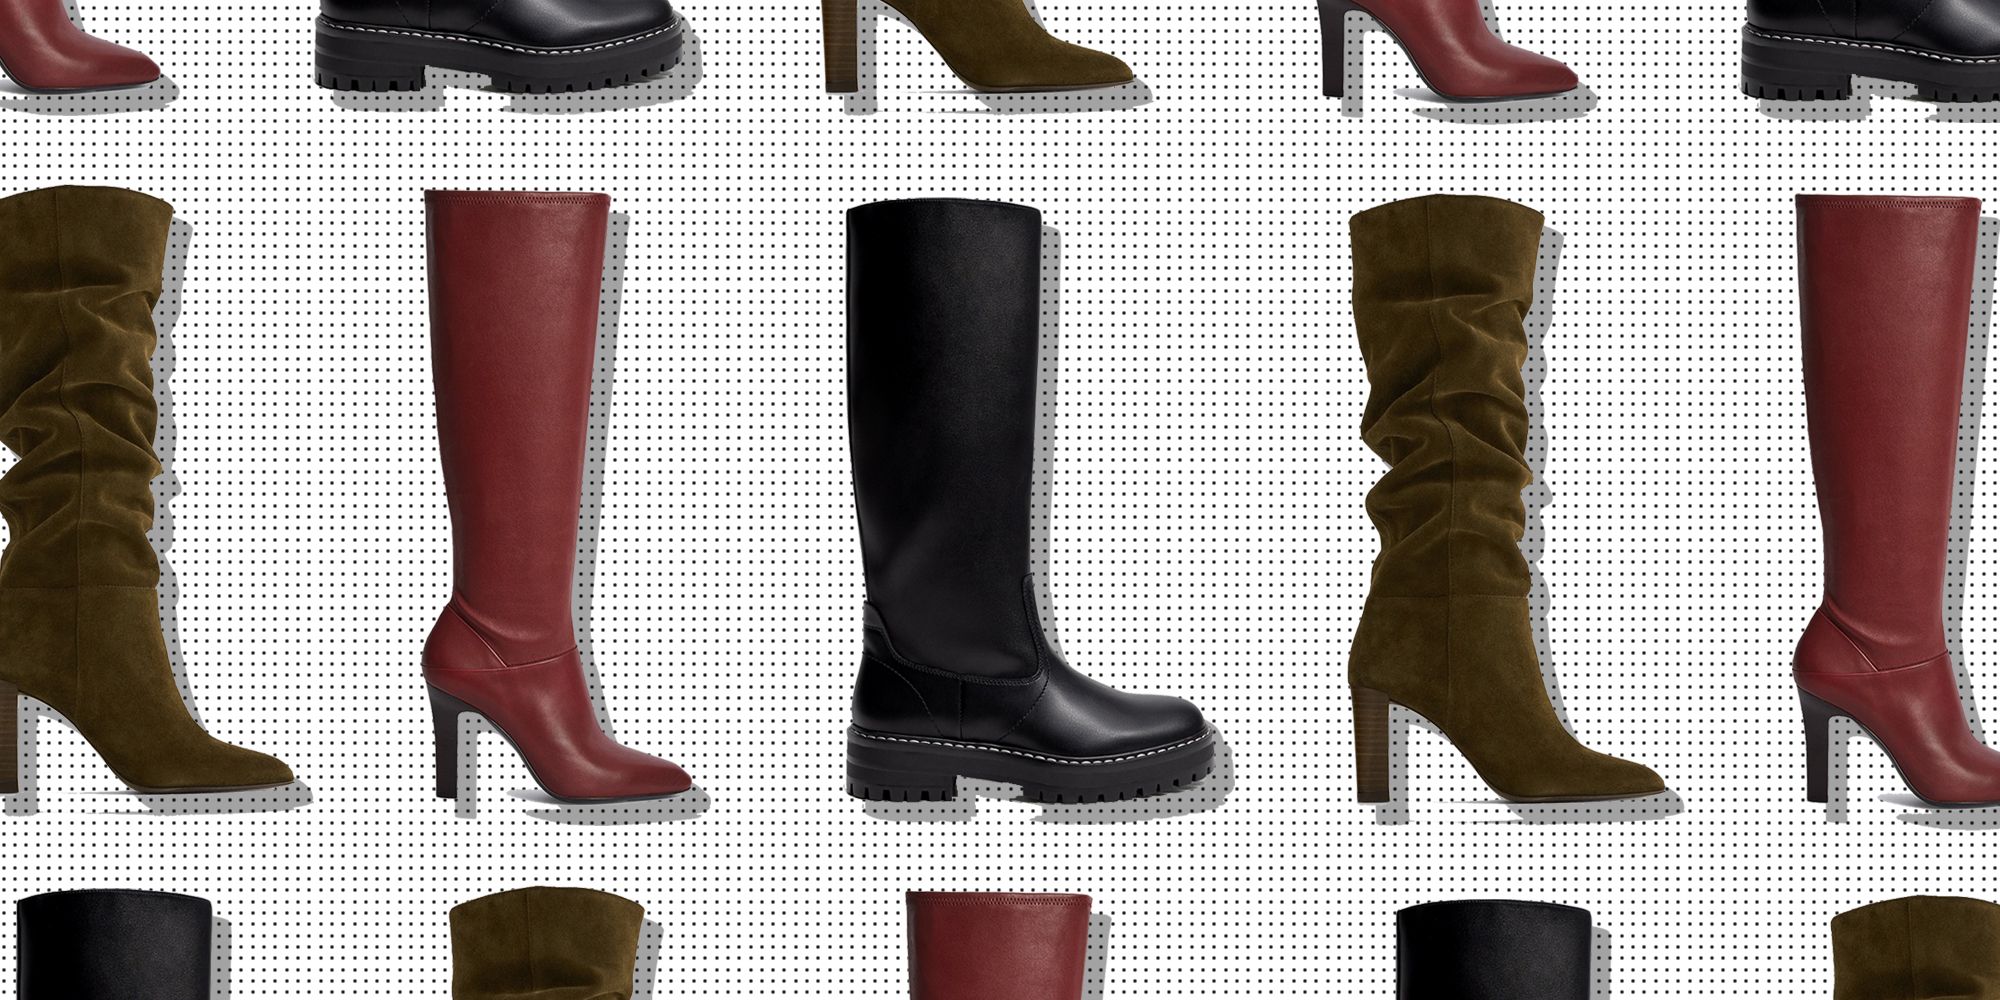 29 Knee High Boots To See You Through 